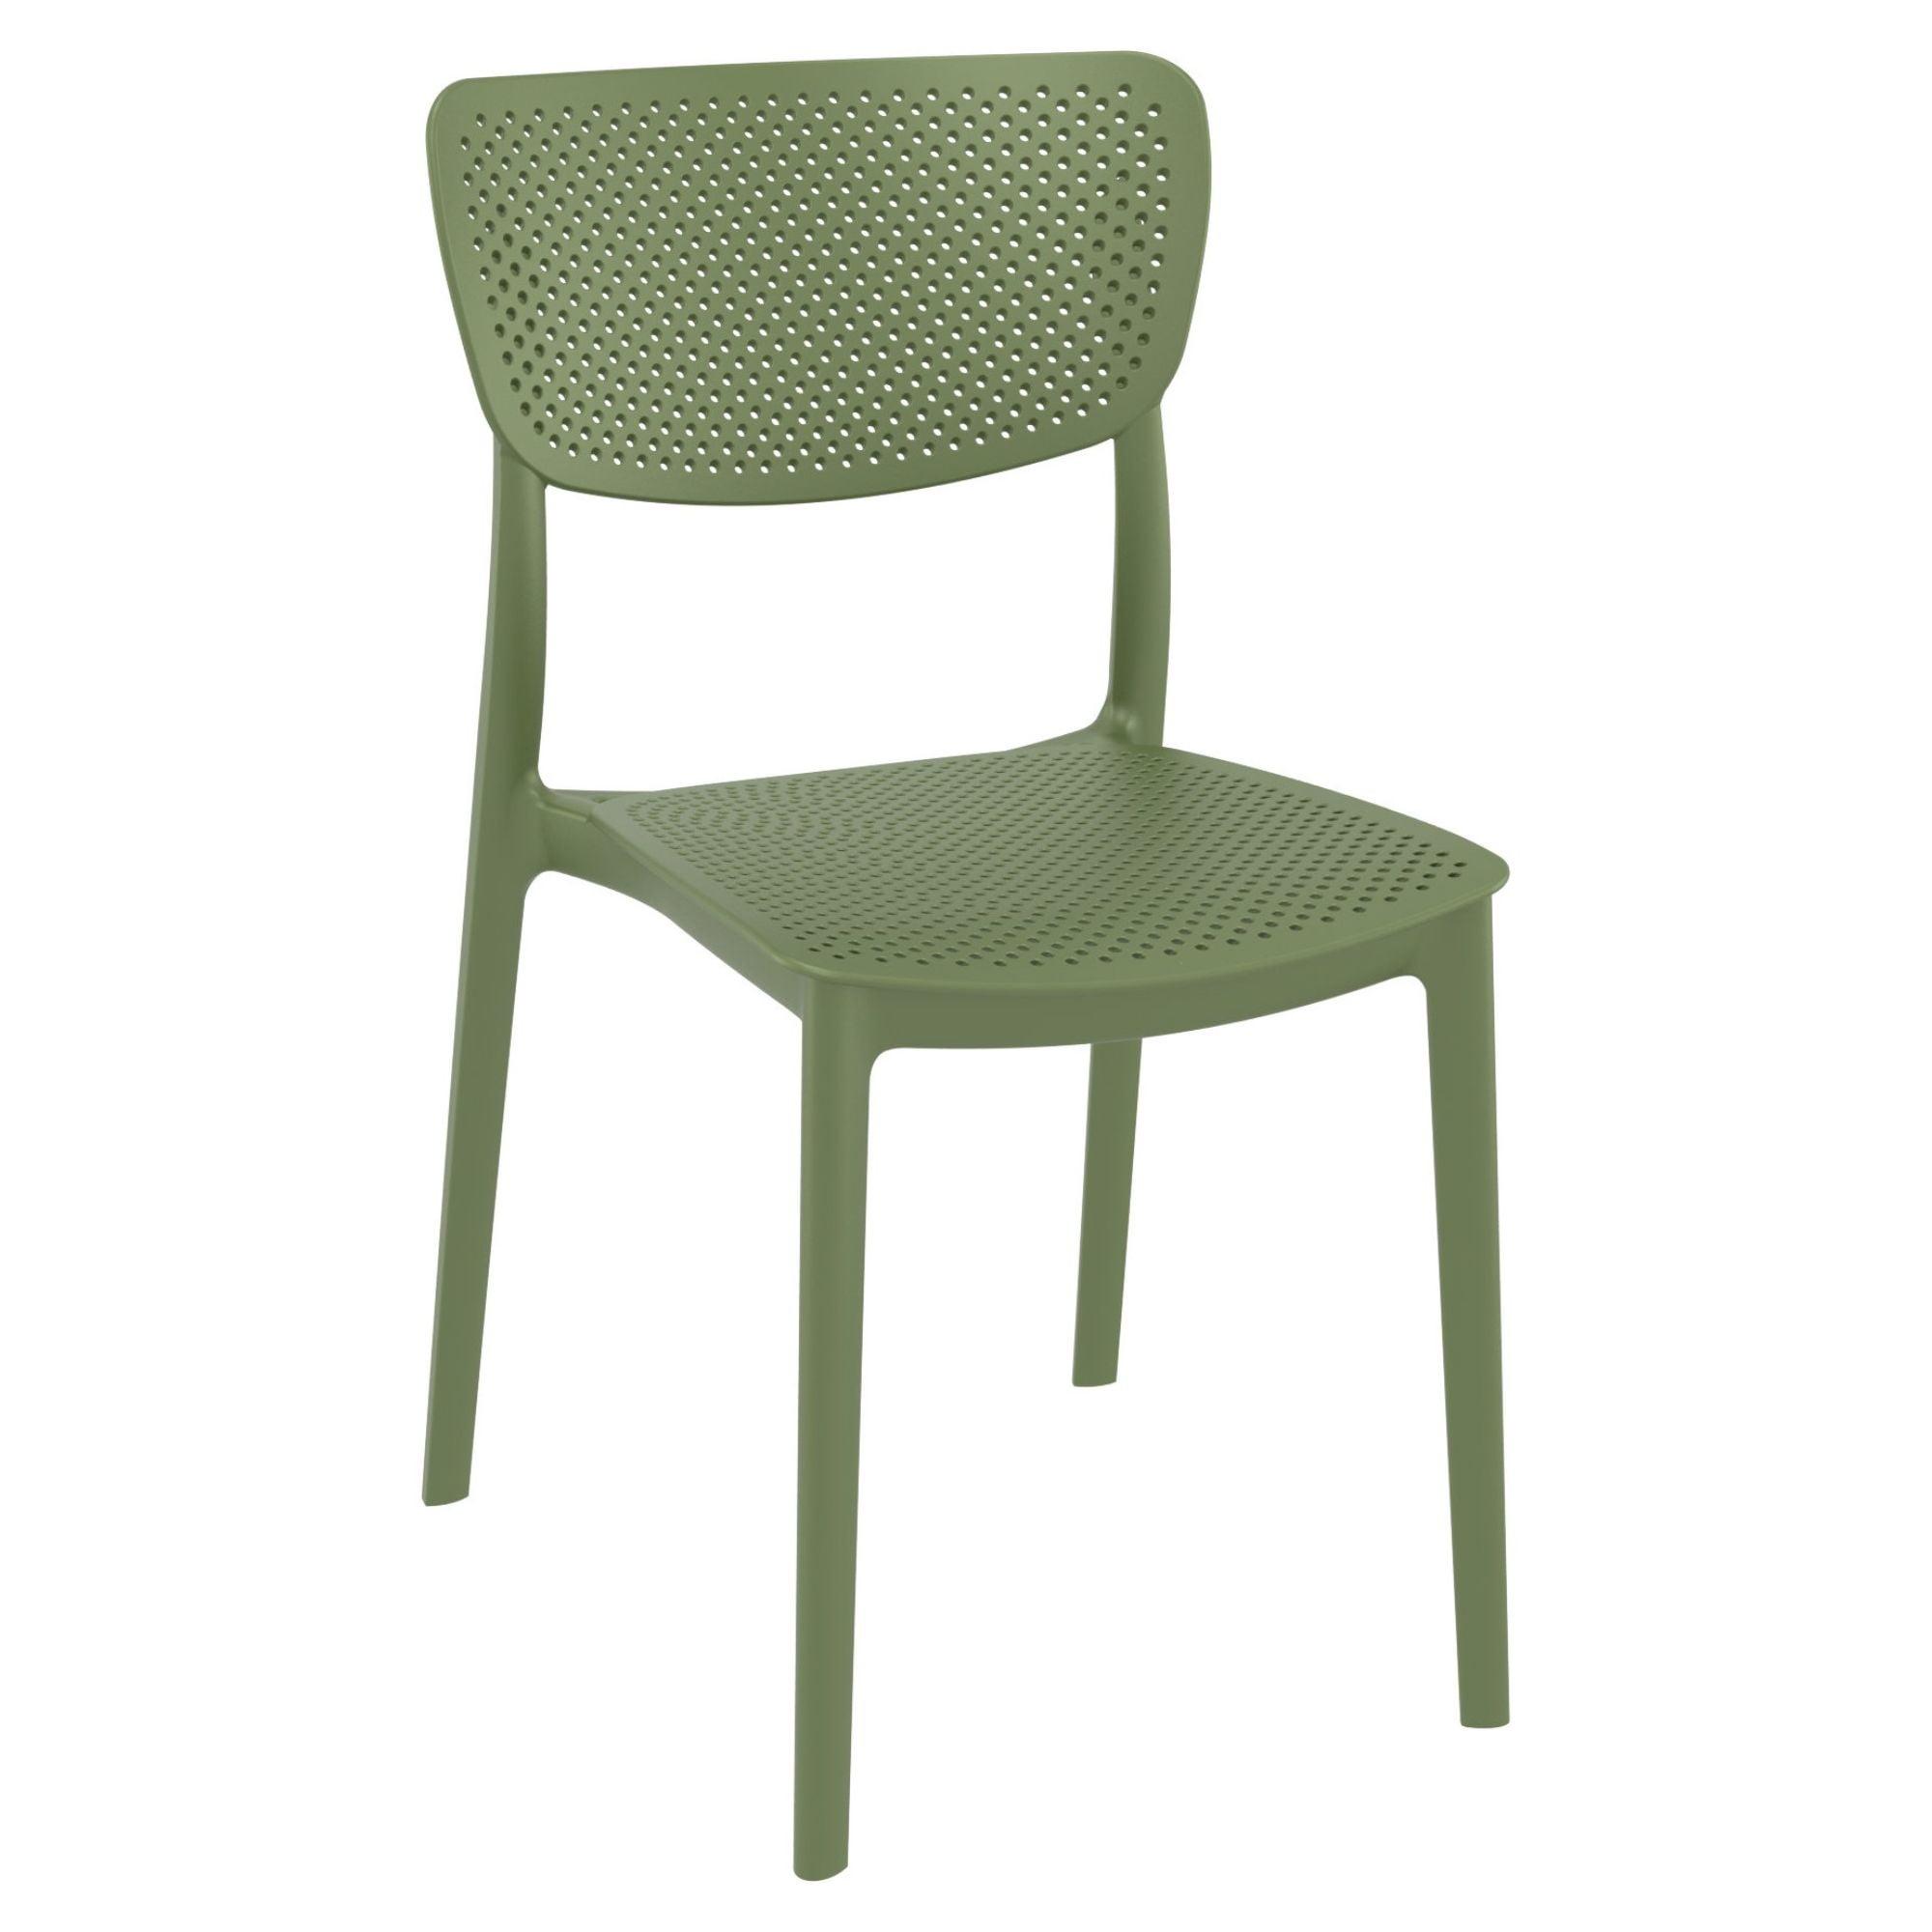 Transitional Olive Green Stackable Outdoor Dining Chair